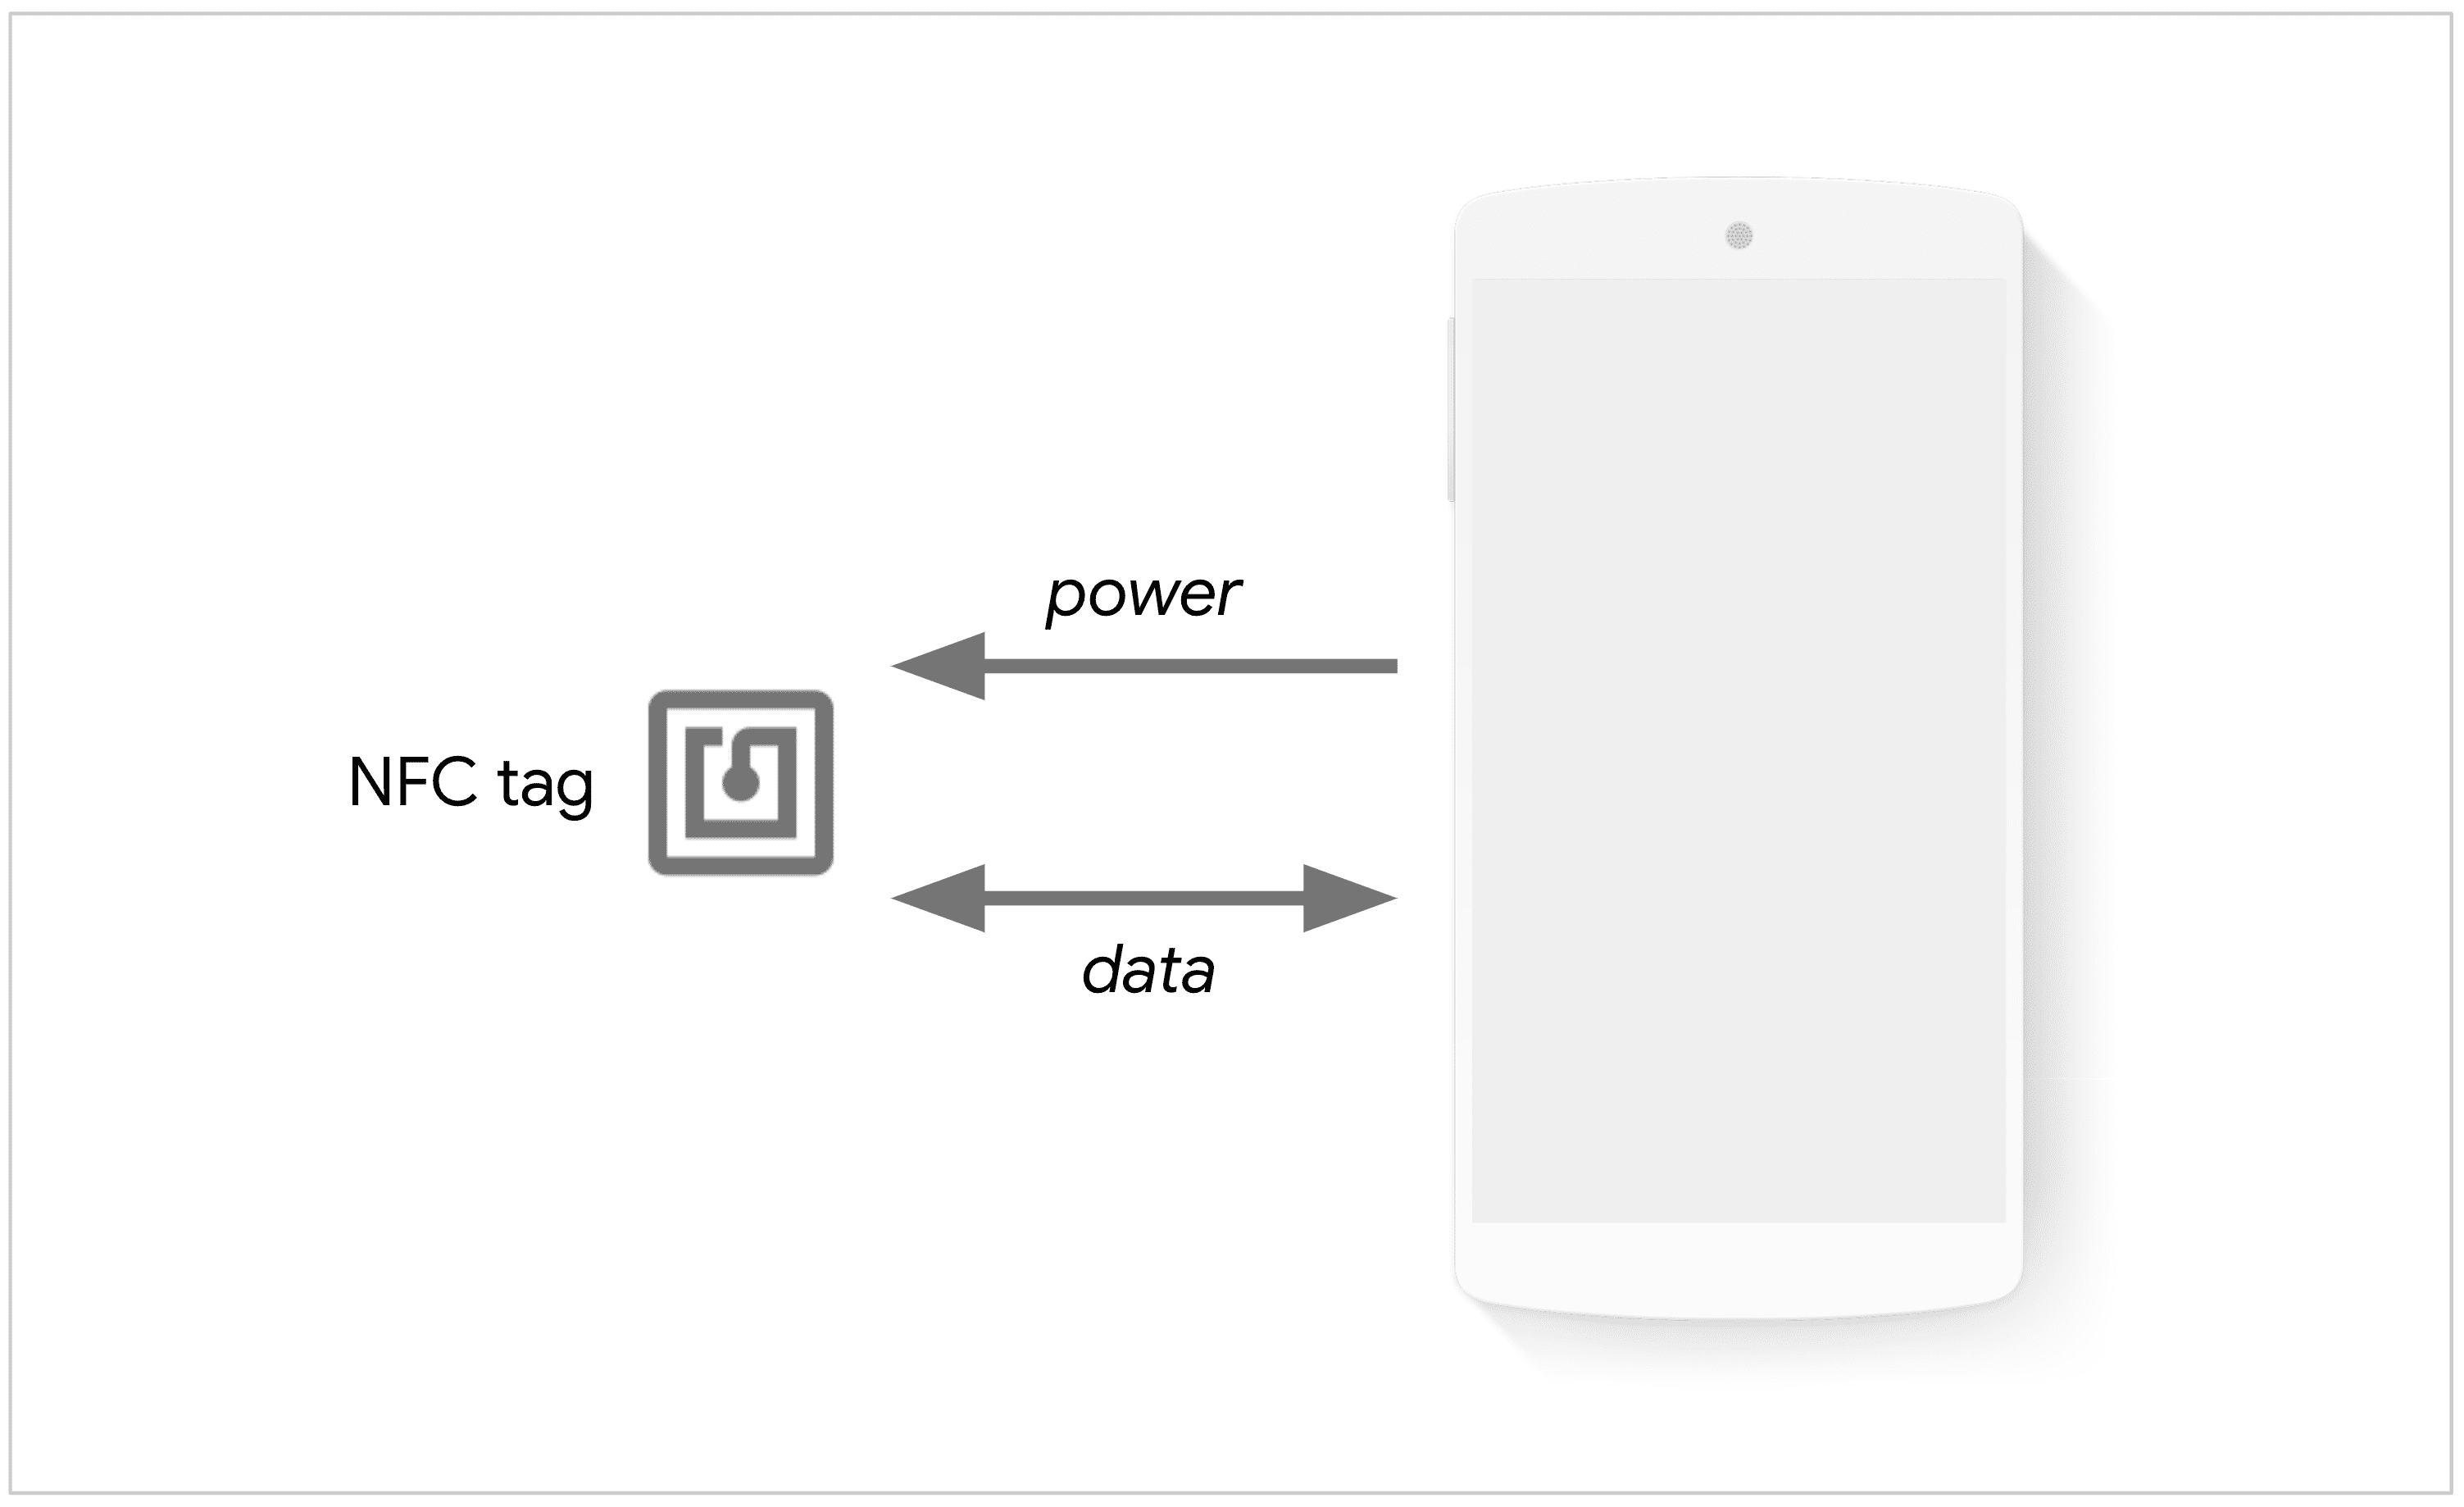 Phone powering up an NFC tag to exchange data